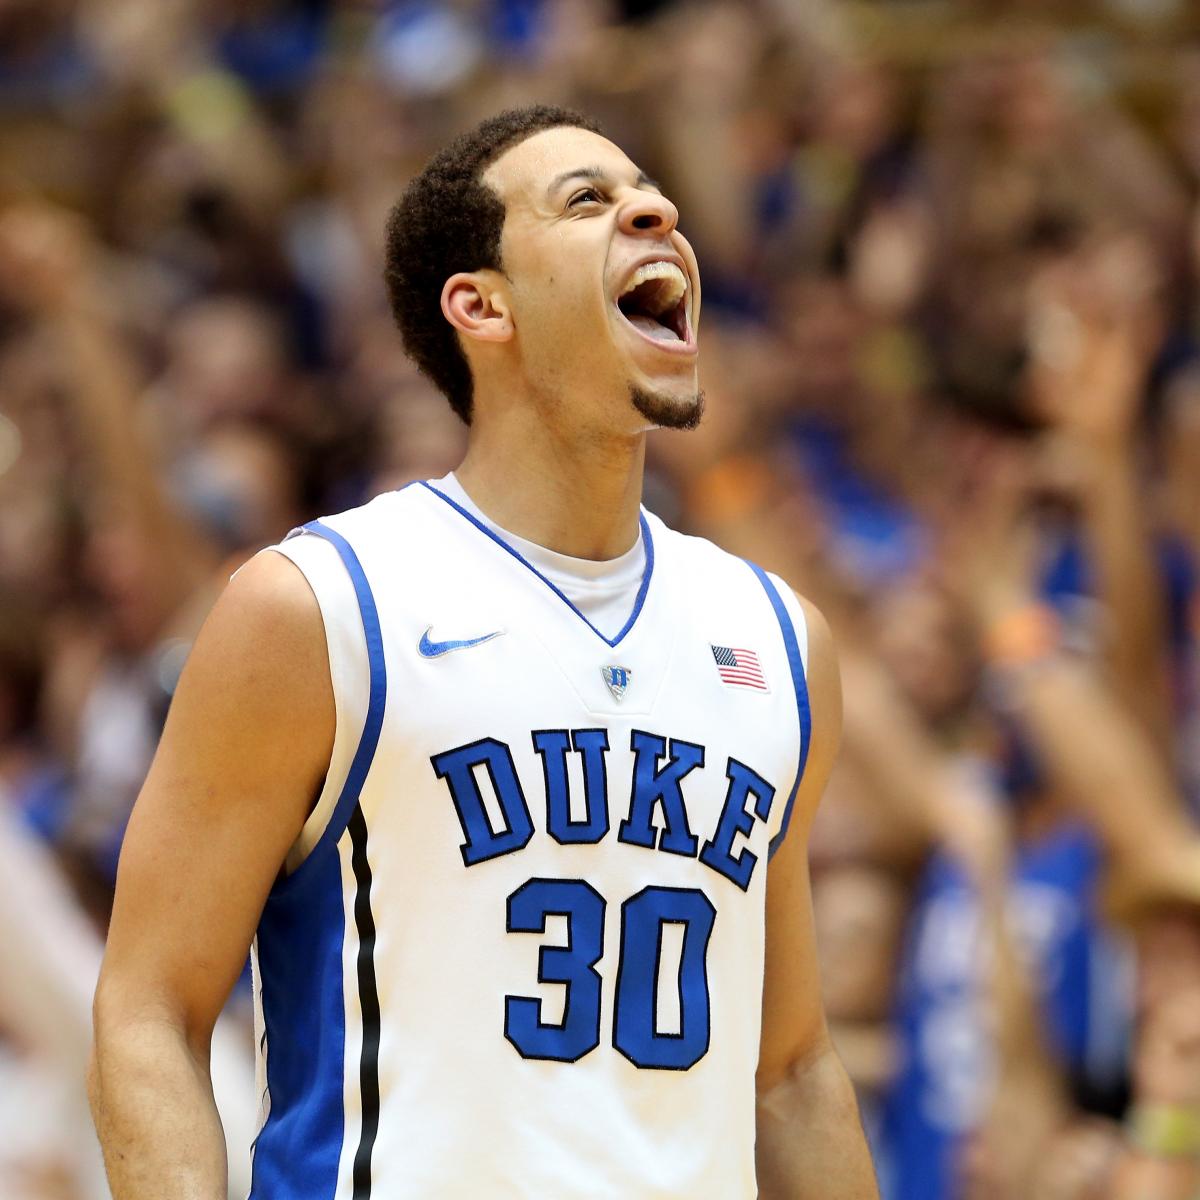 Duke vs. UNC Blue Devils Build on March Madness Credentials with